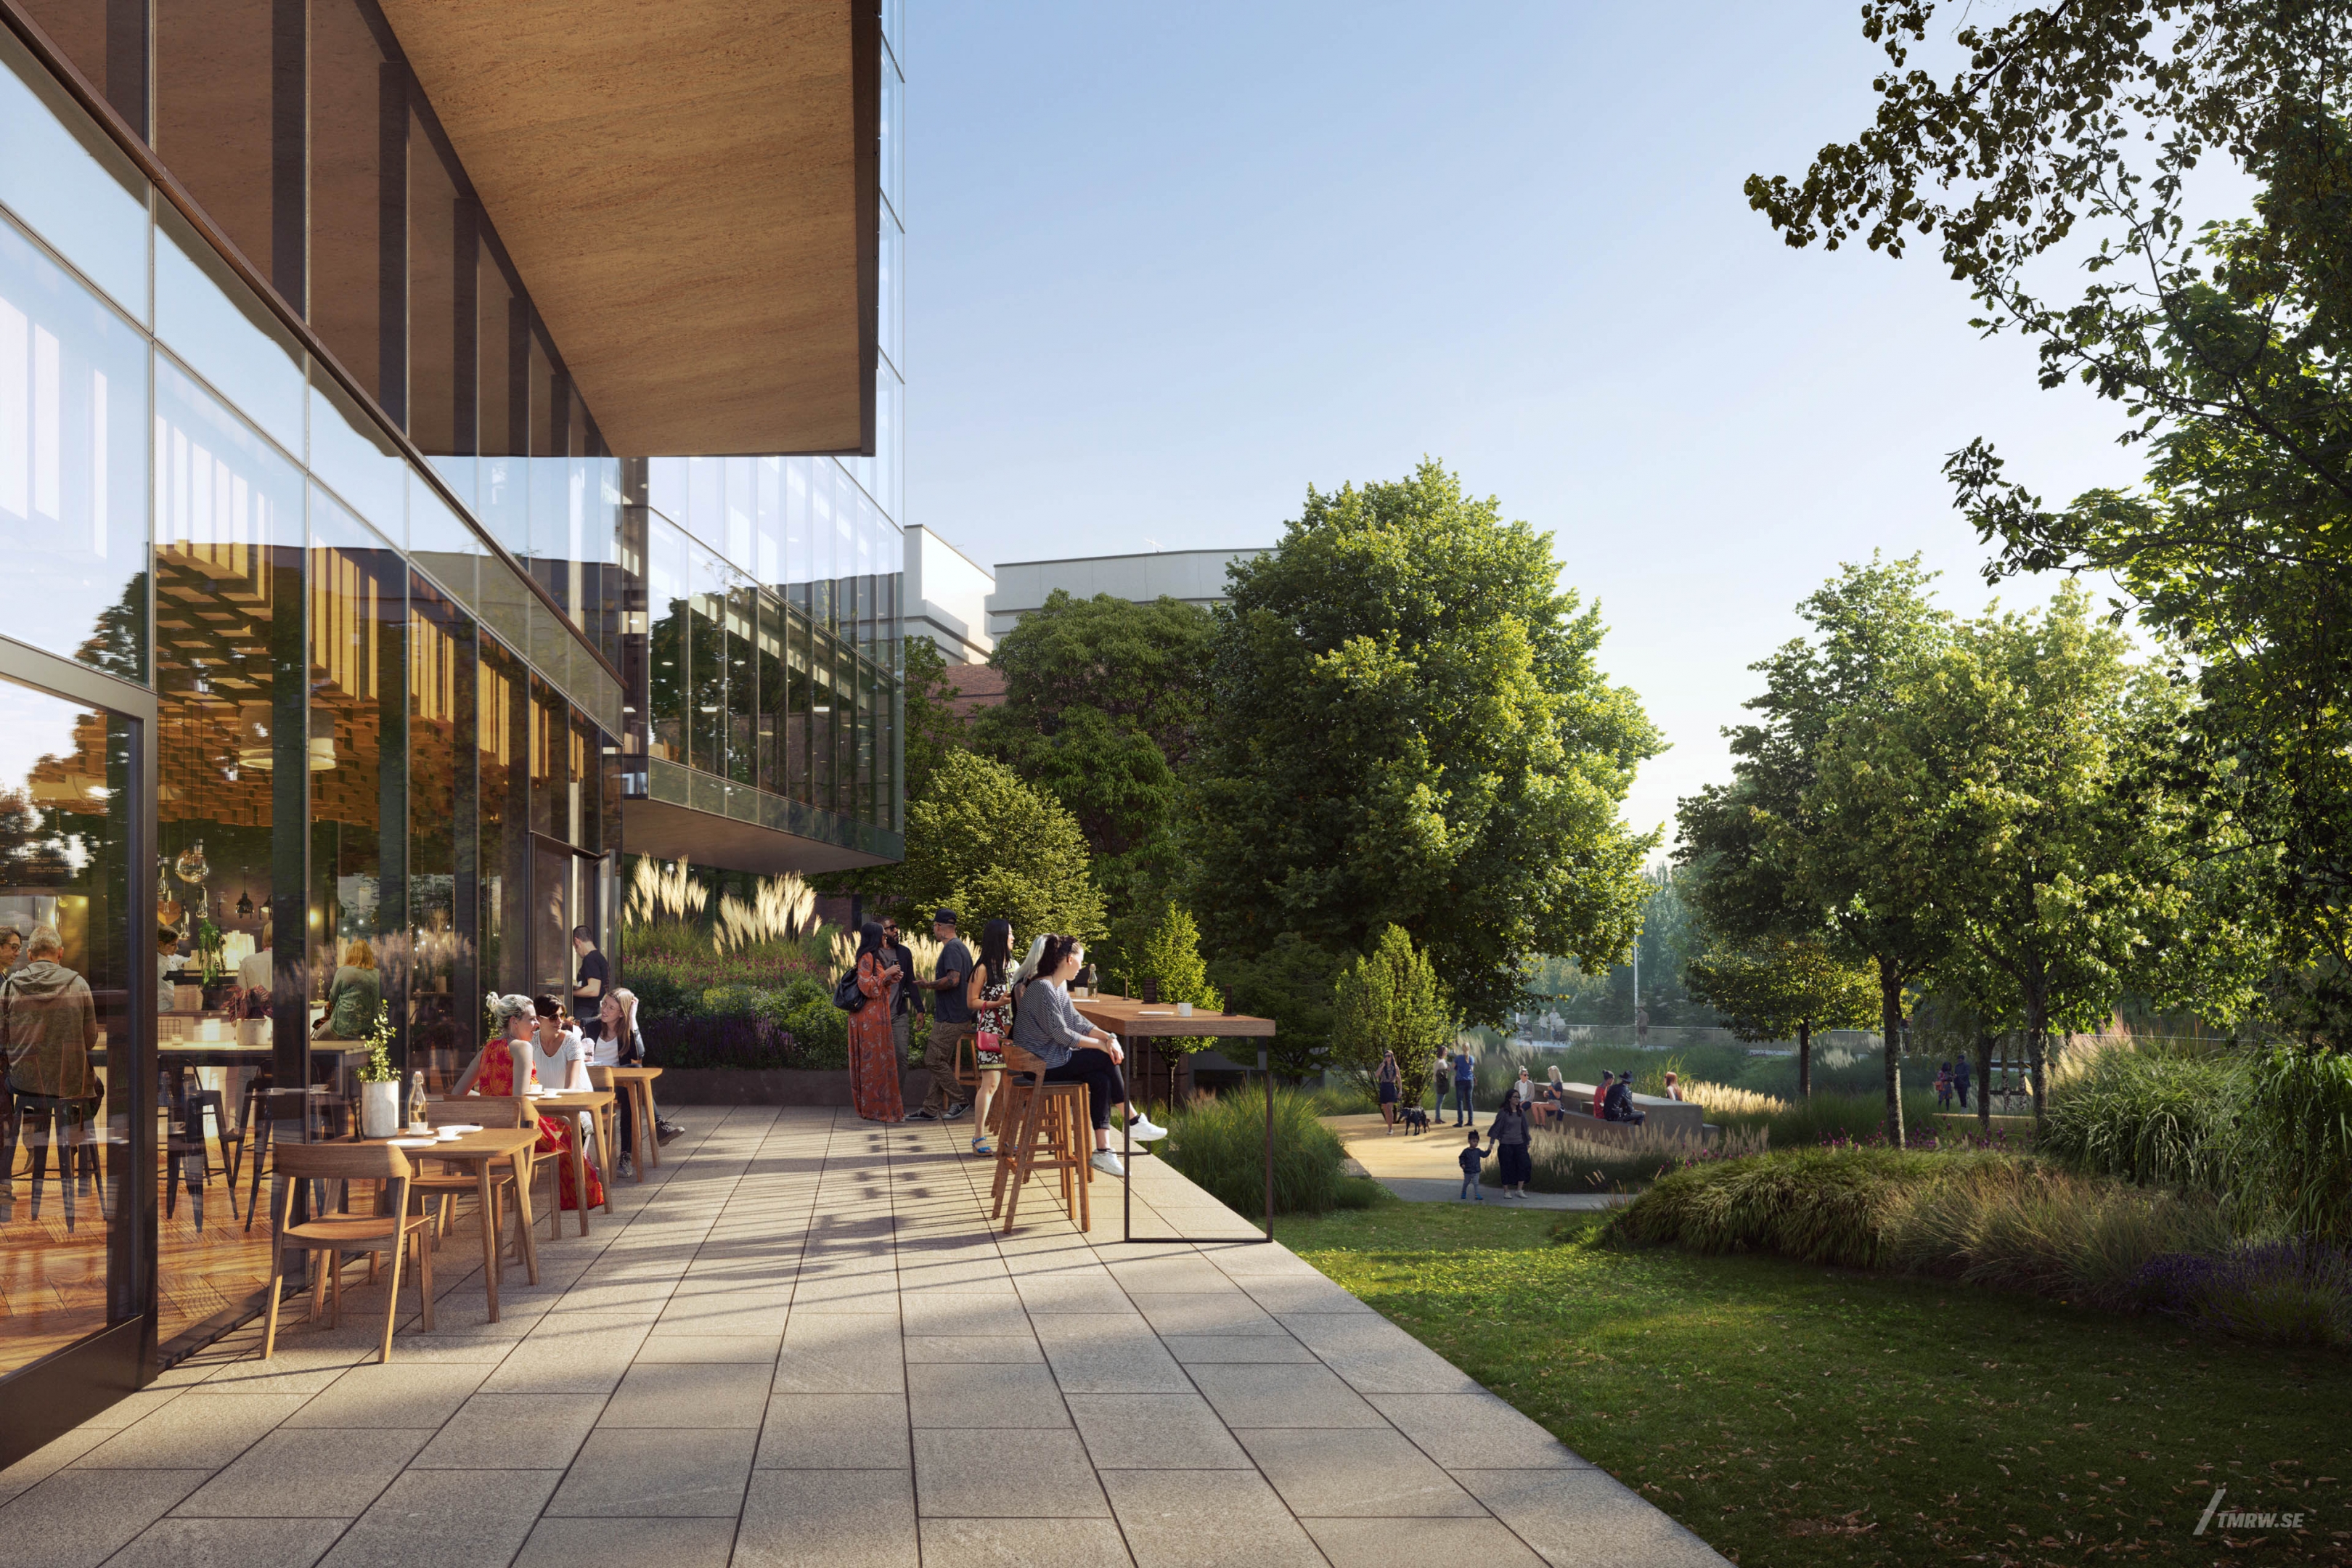 Architectural visualization of 101 12th Street for Studios, a patio in day light from a street view.